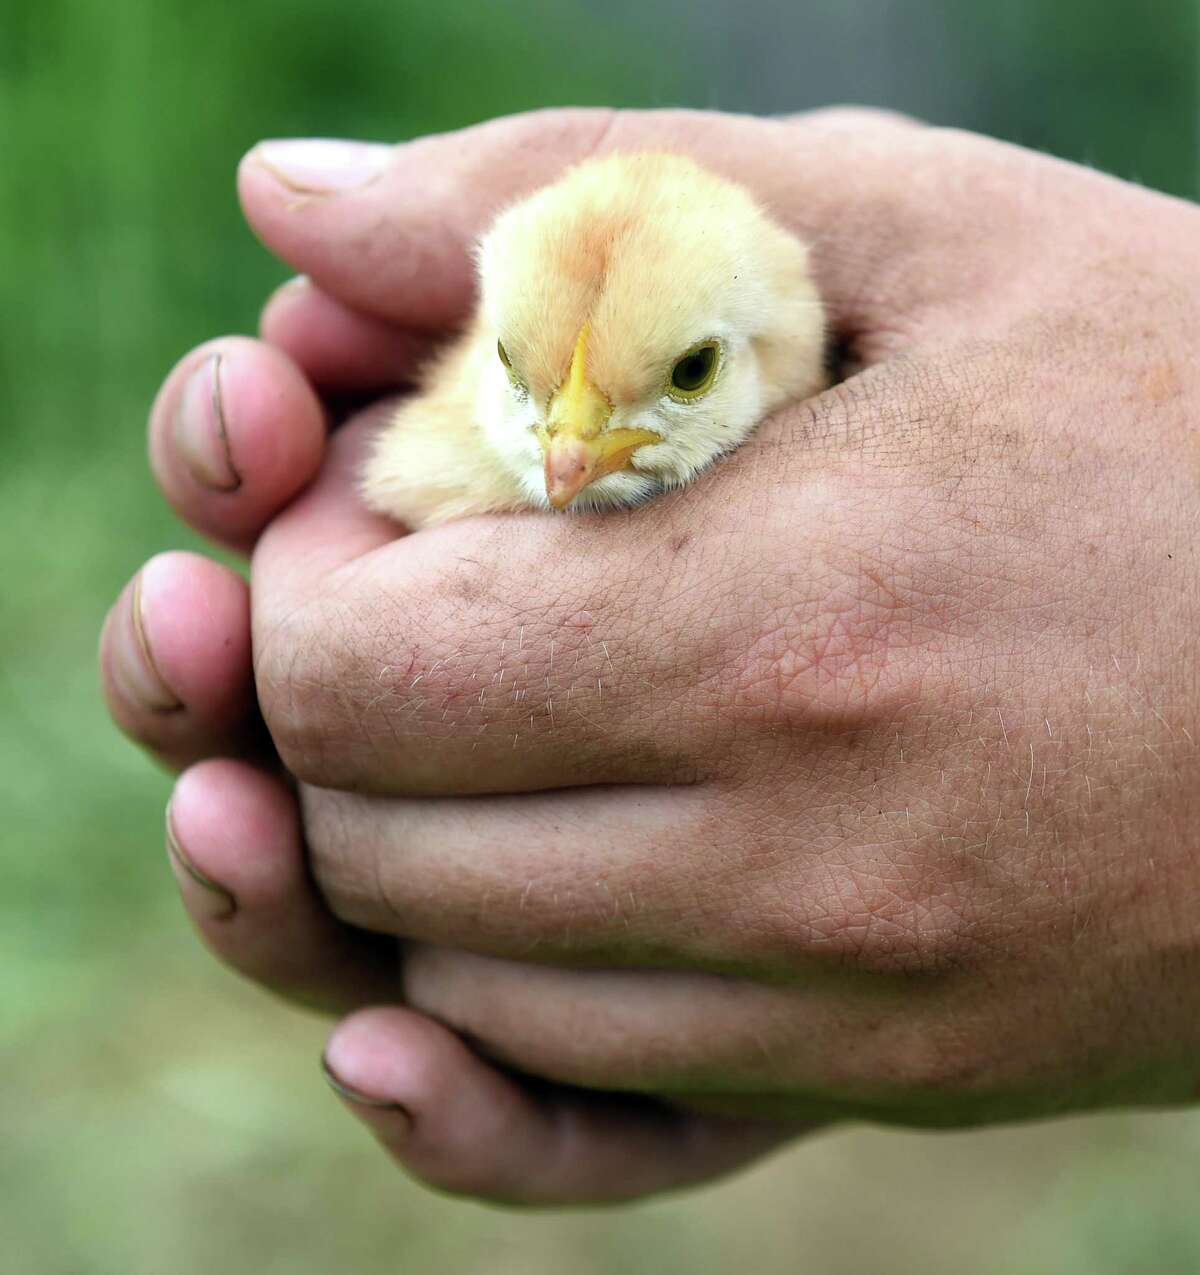 In this file photo, Lars Demander holds a newly hatched chick at Clover Nook Farm in Bethany in 2015. The farm was celebrating it's 250th anniversary.